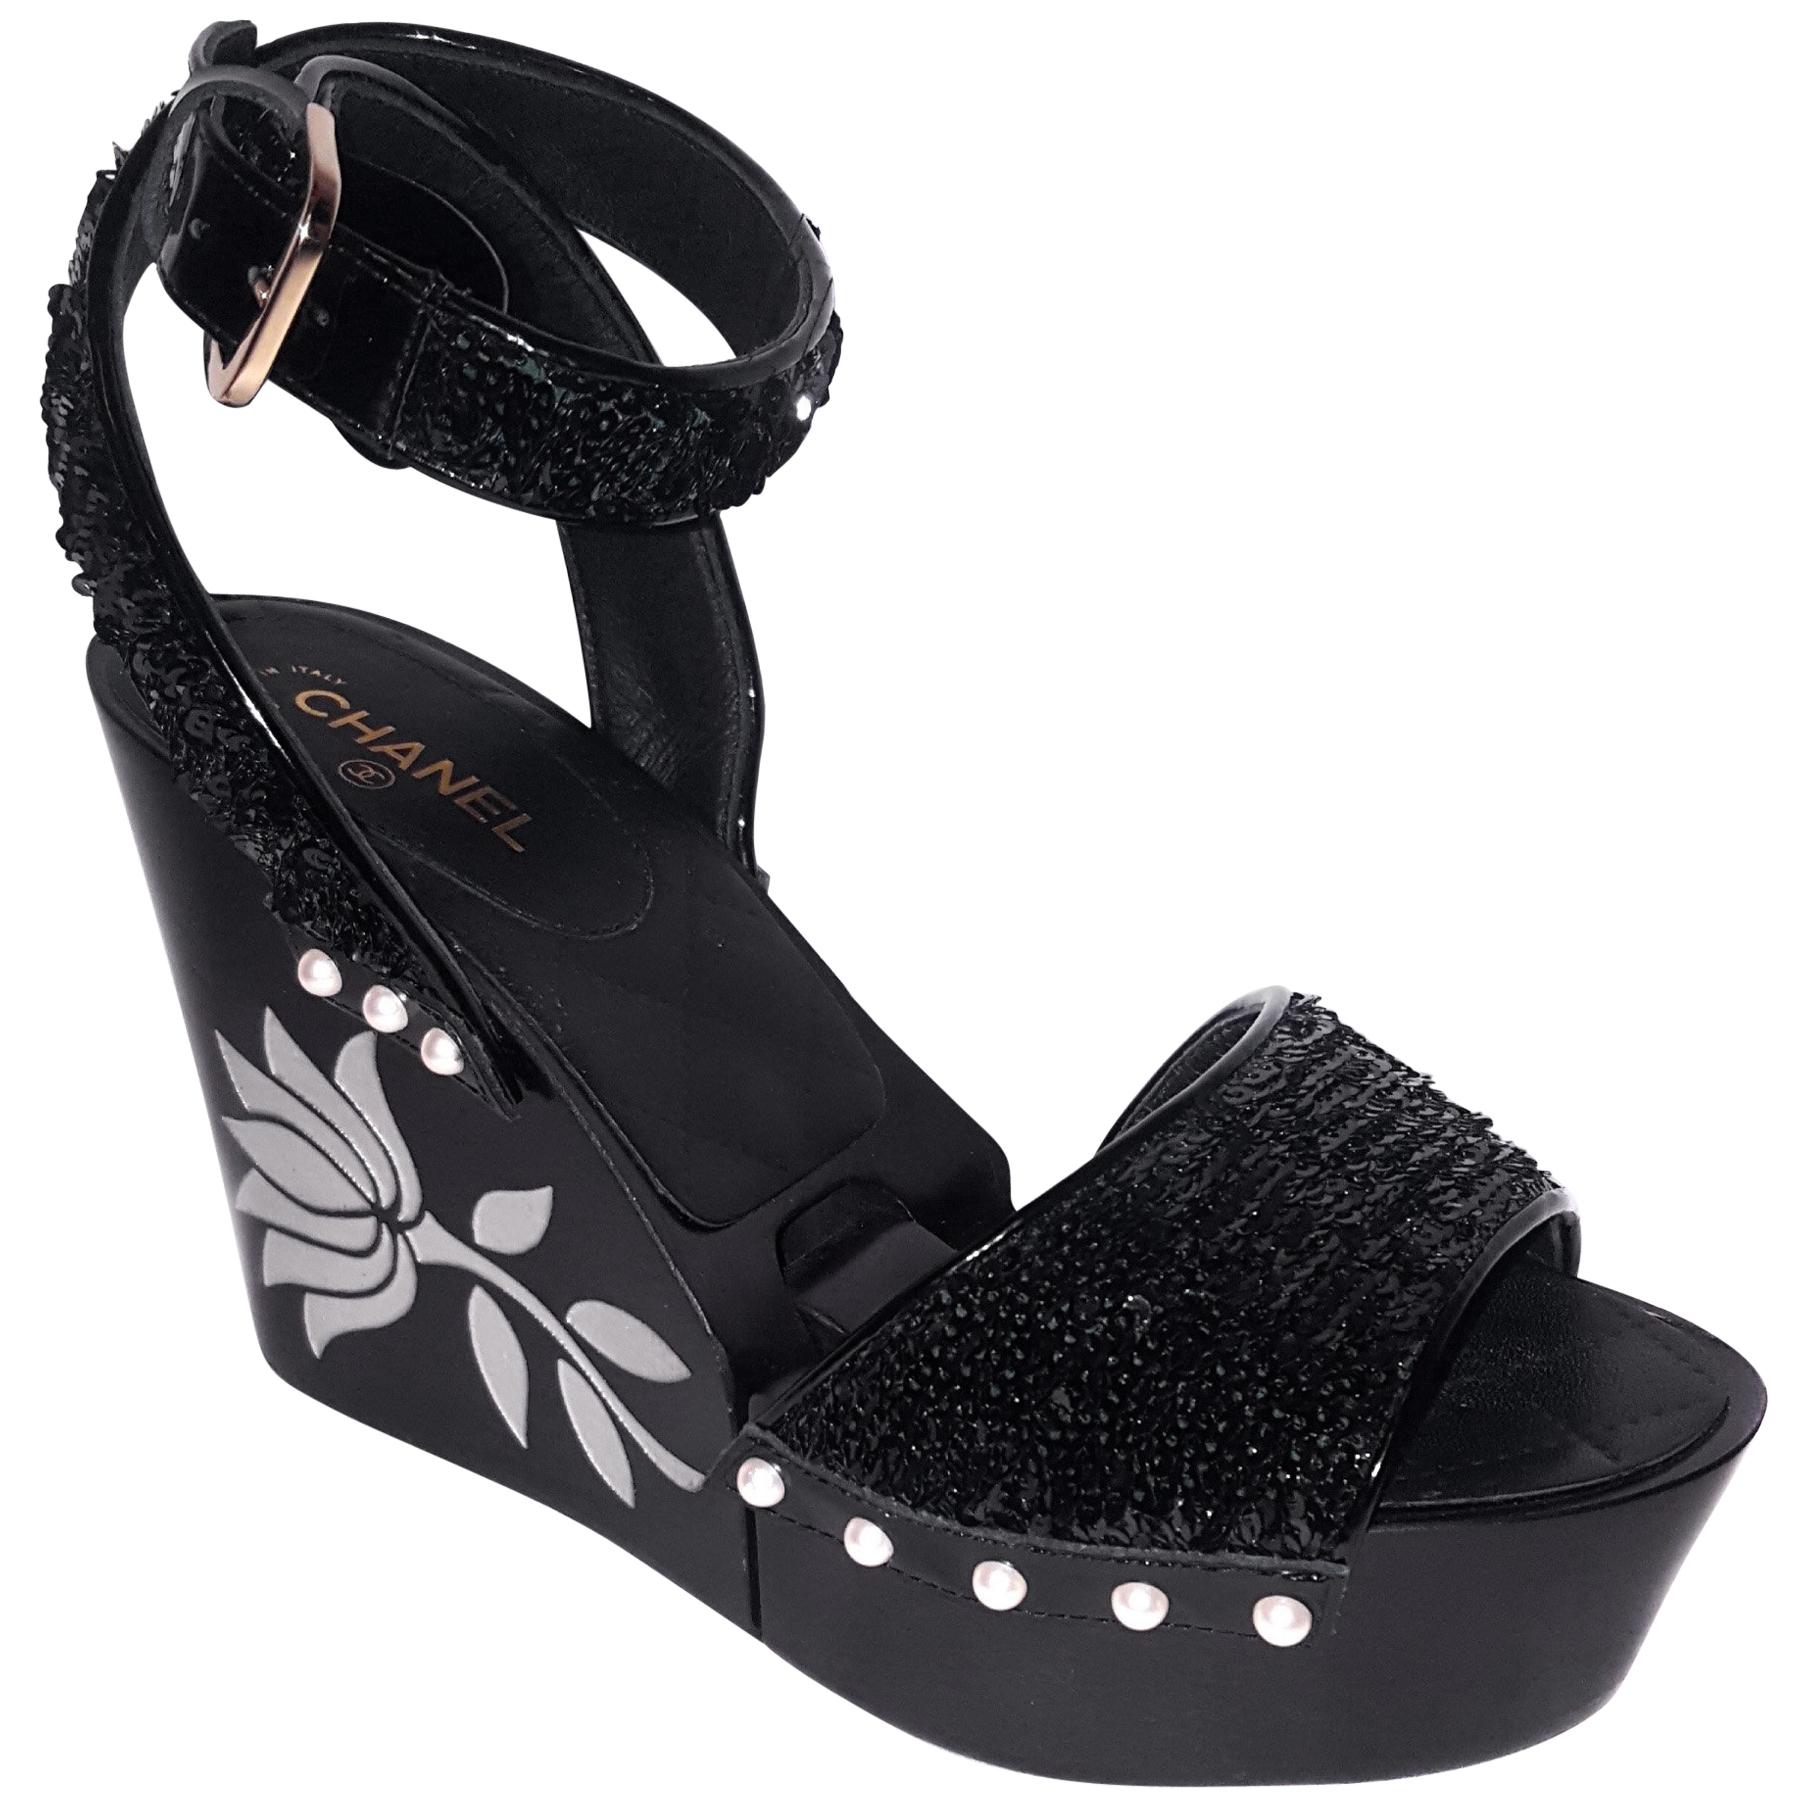 Chanel Wedge Black Sandals W/ Faux Mother of Pearl Flower & Sequin Straps For Sale